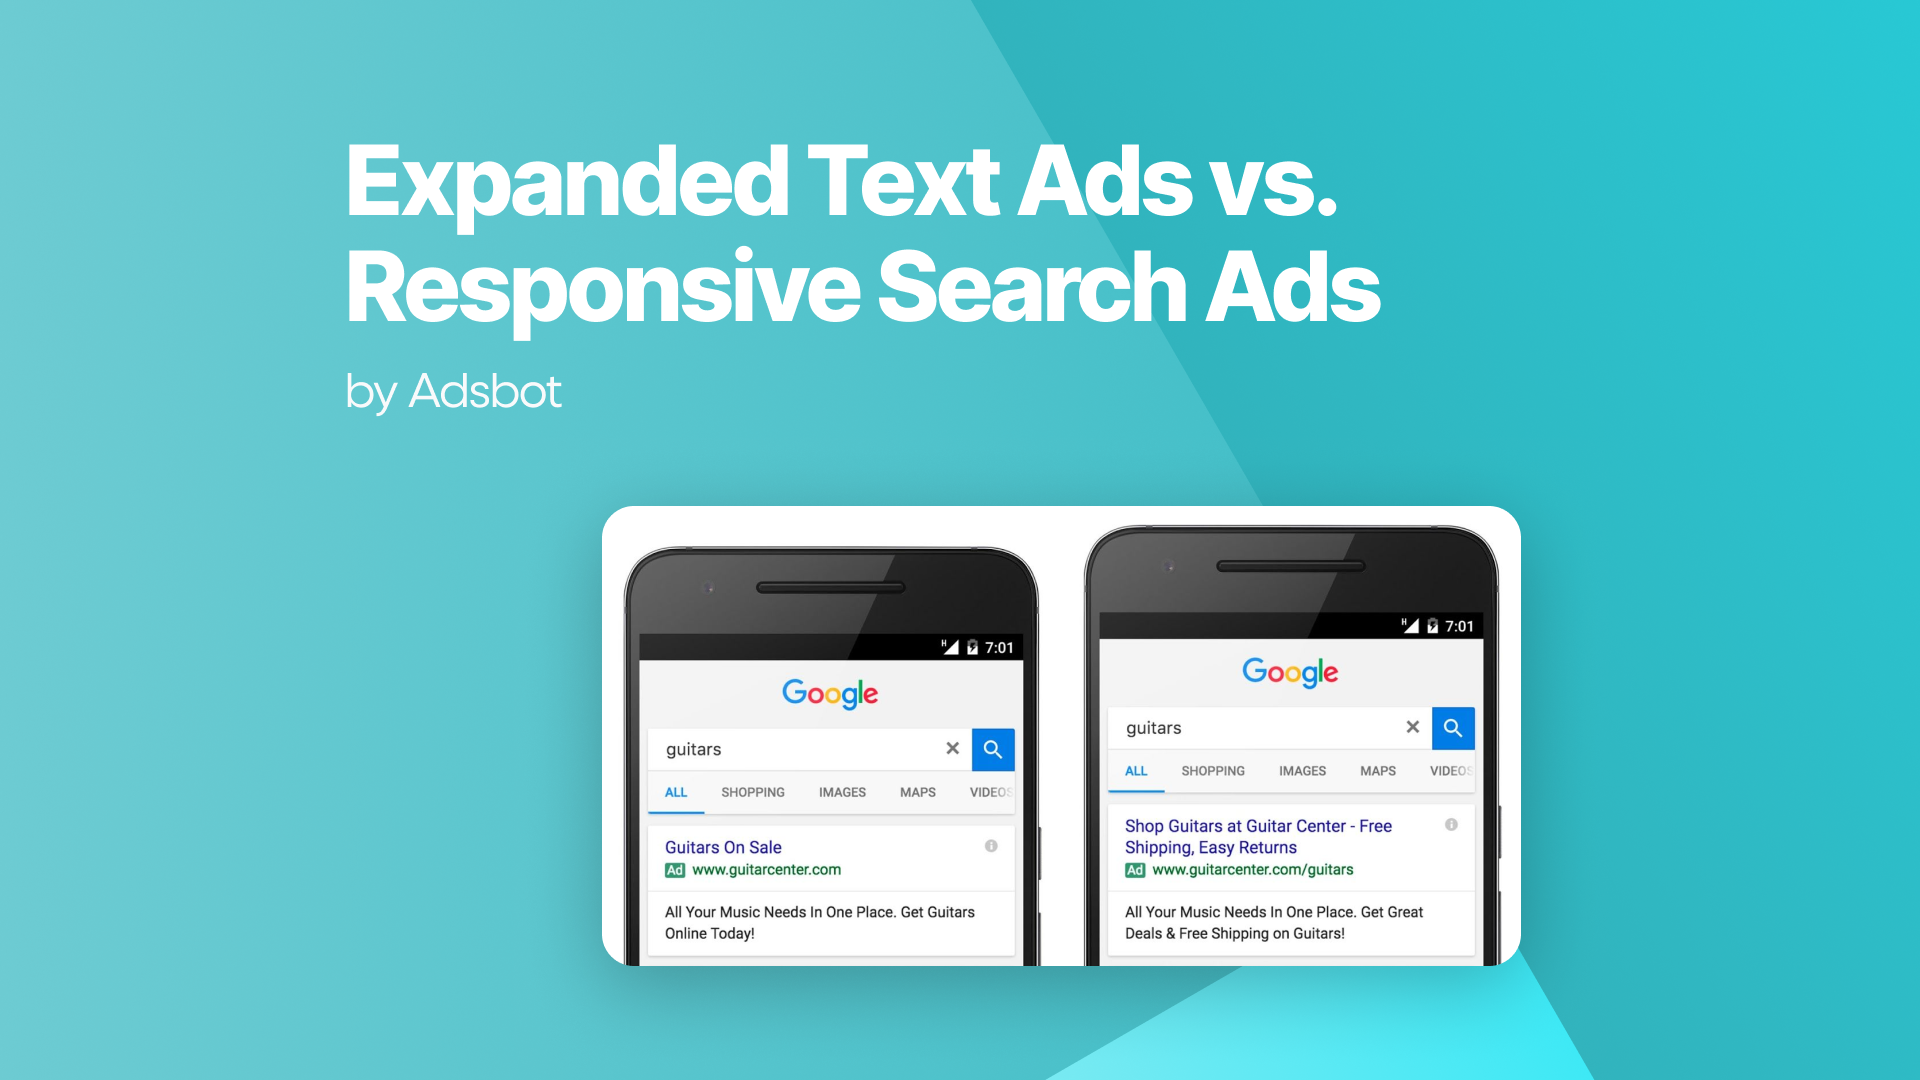 Expanded Text Ads vs. Responsive Search Ads